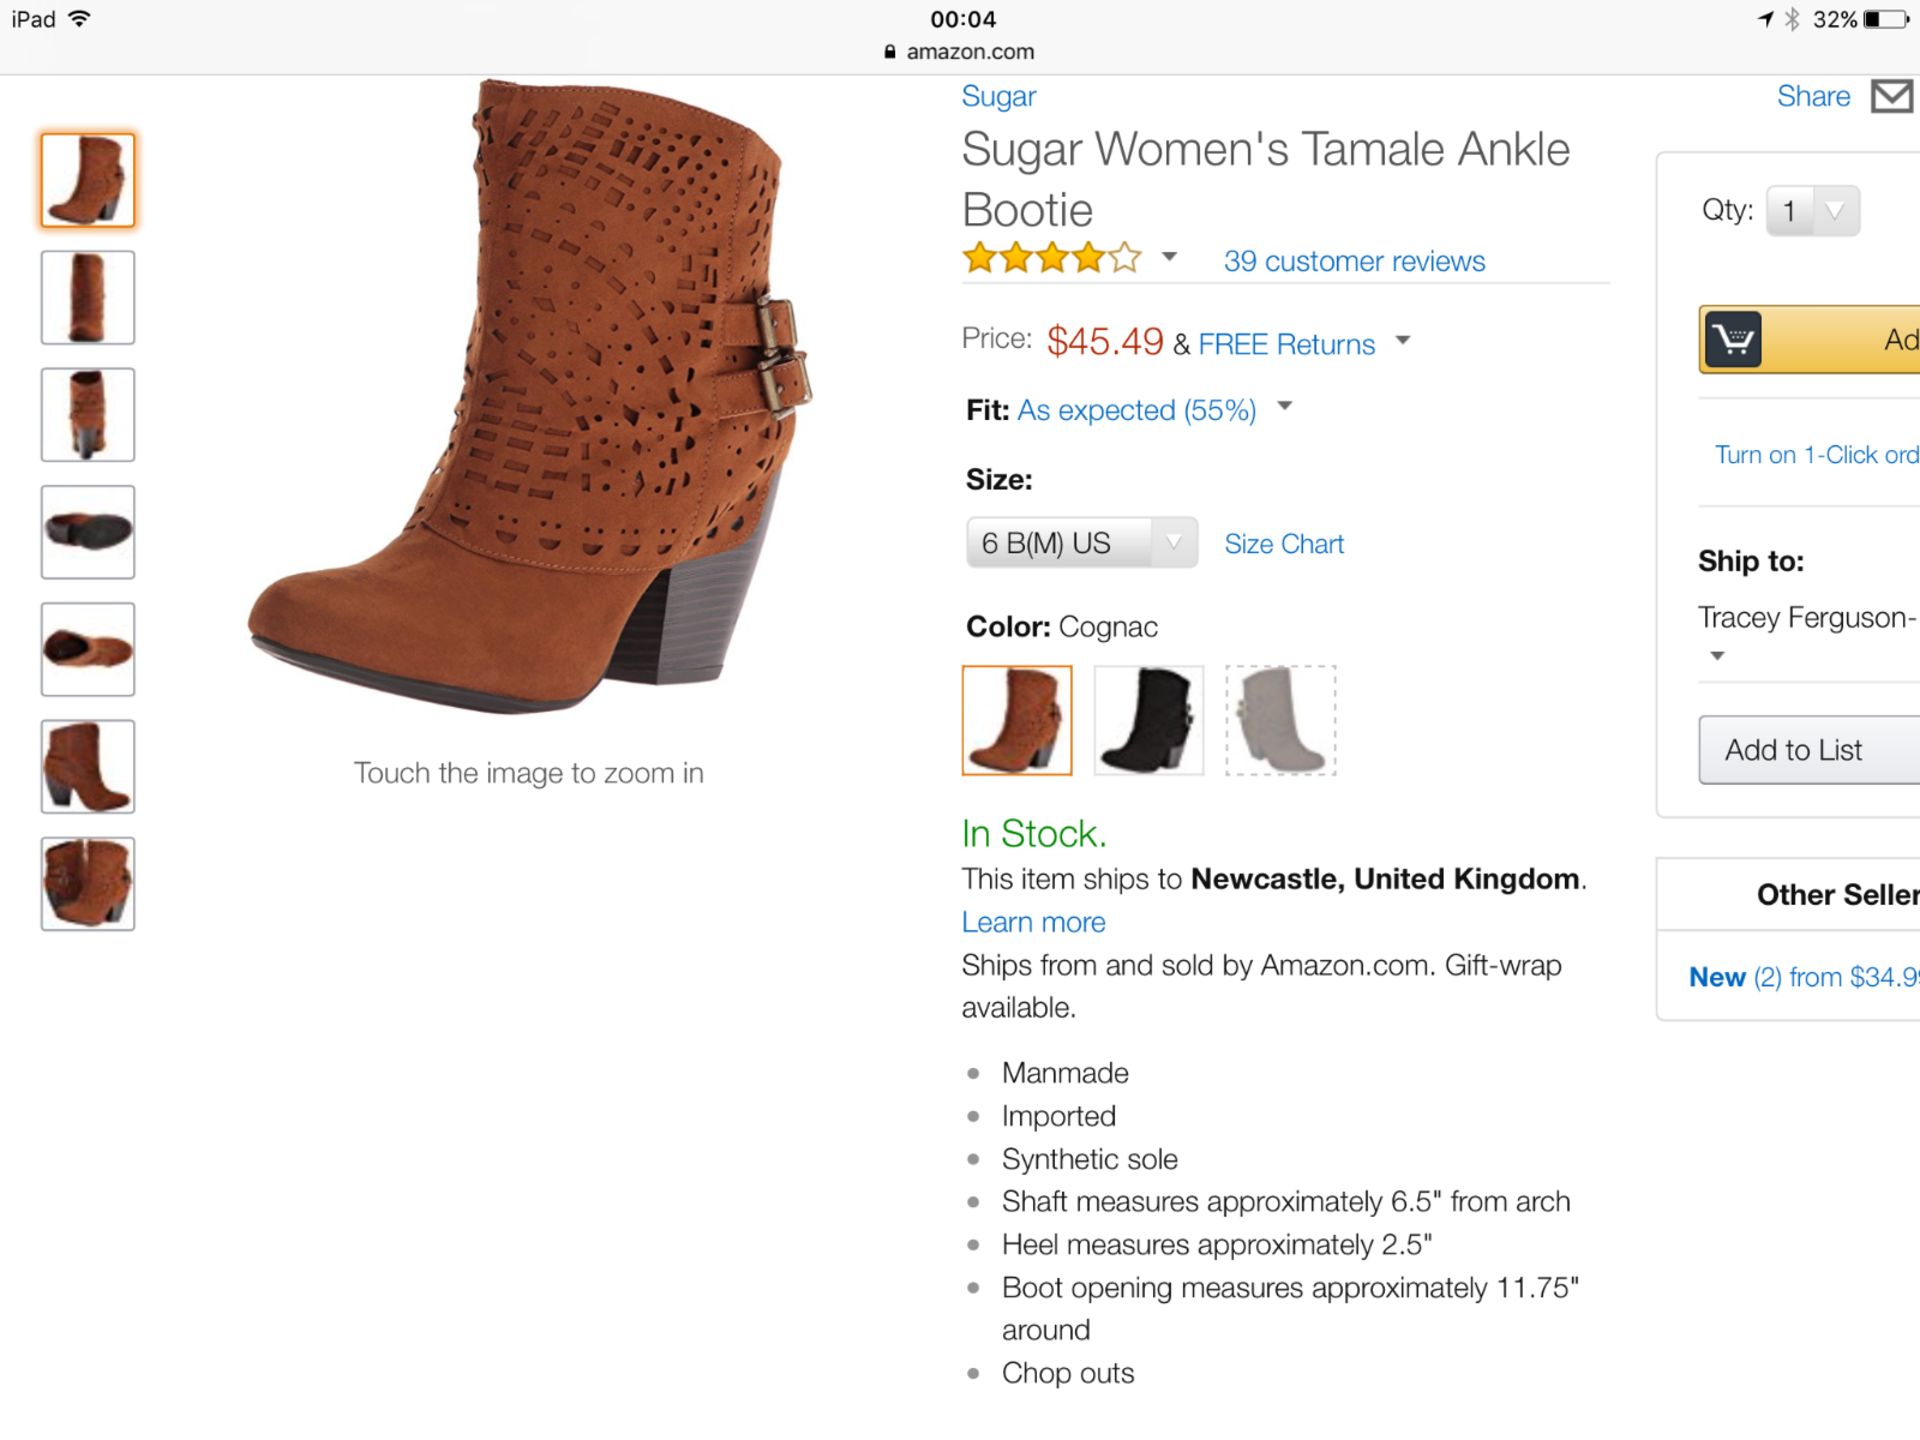 Sugar Women's Tamale Ankle Bootie, Size US Eur 36 UK 4 (New with box) [Ref: B-002]